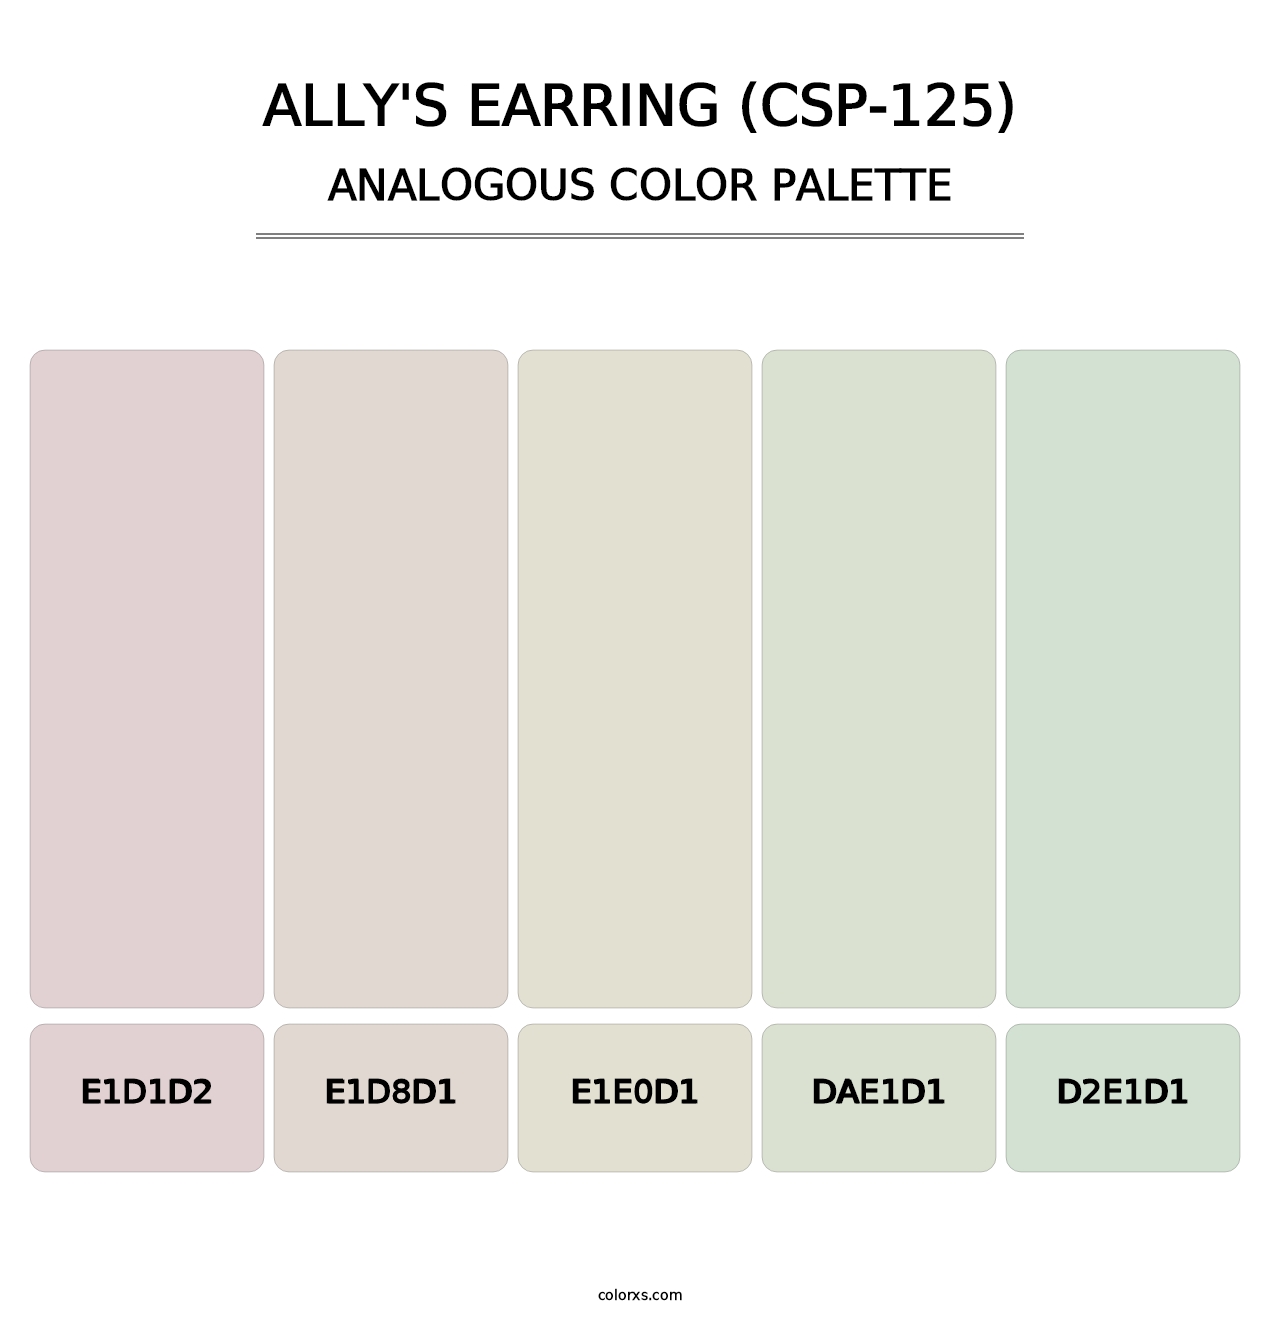 Ally's Earring (CSP-125) - Analogous Color Palette